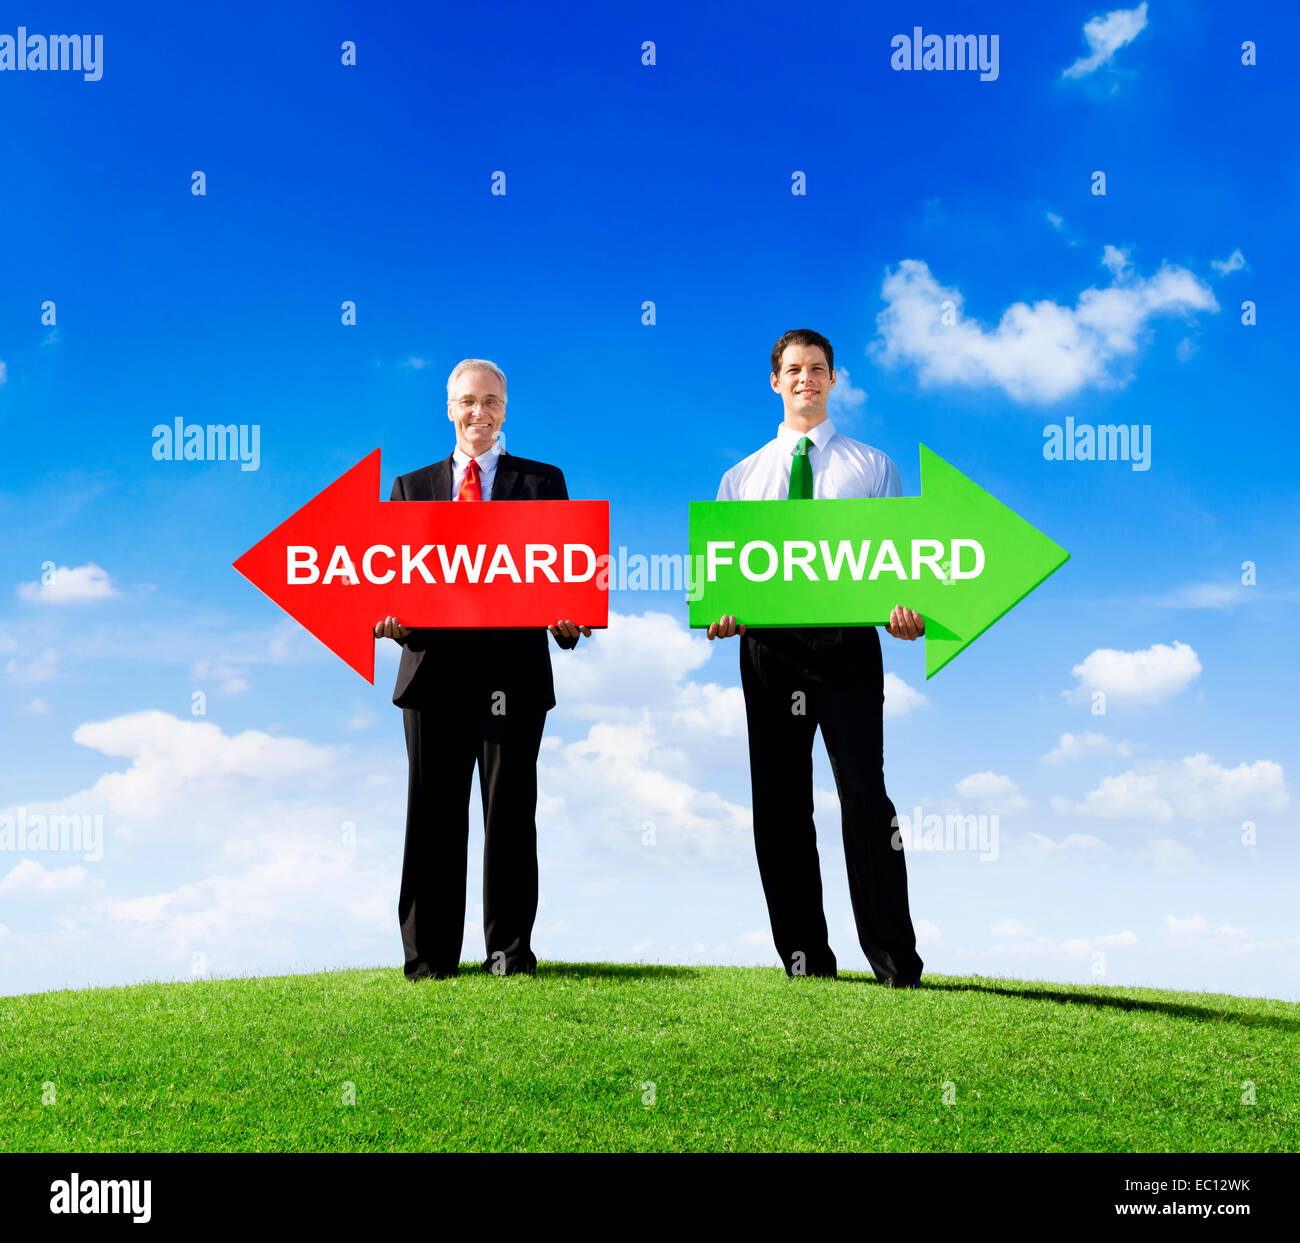 Two Businessmen Holding Contrasting Arrows for Backward and Forward Stock Photo